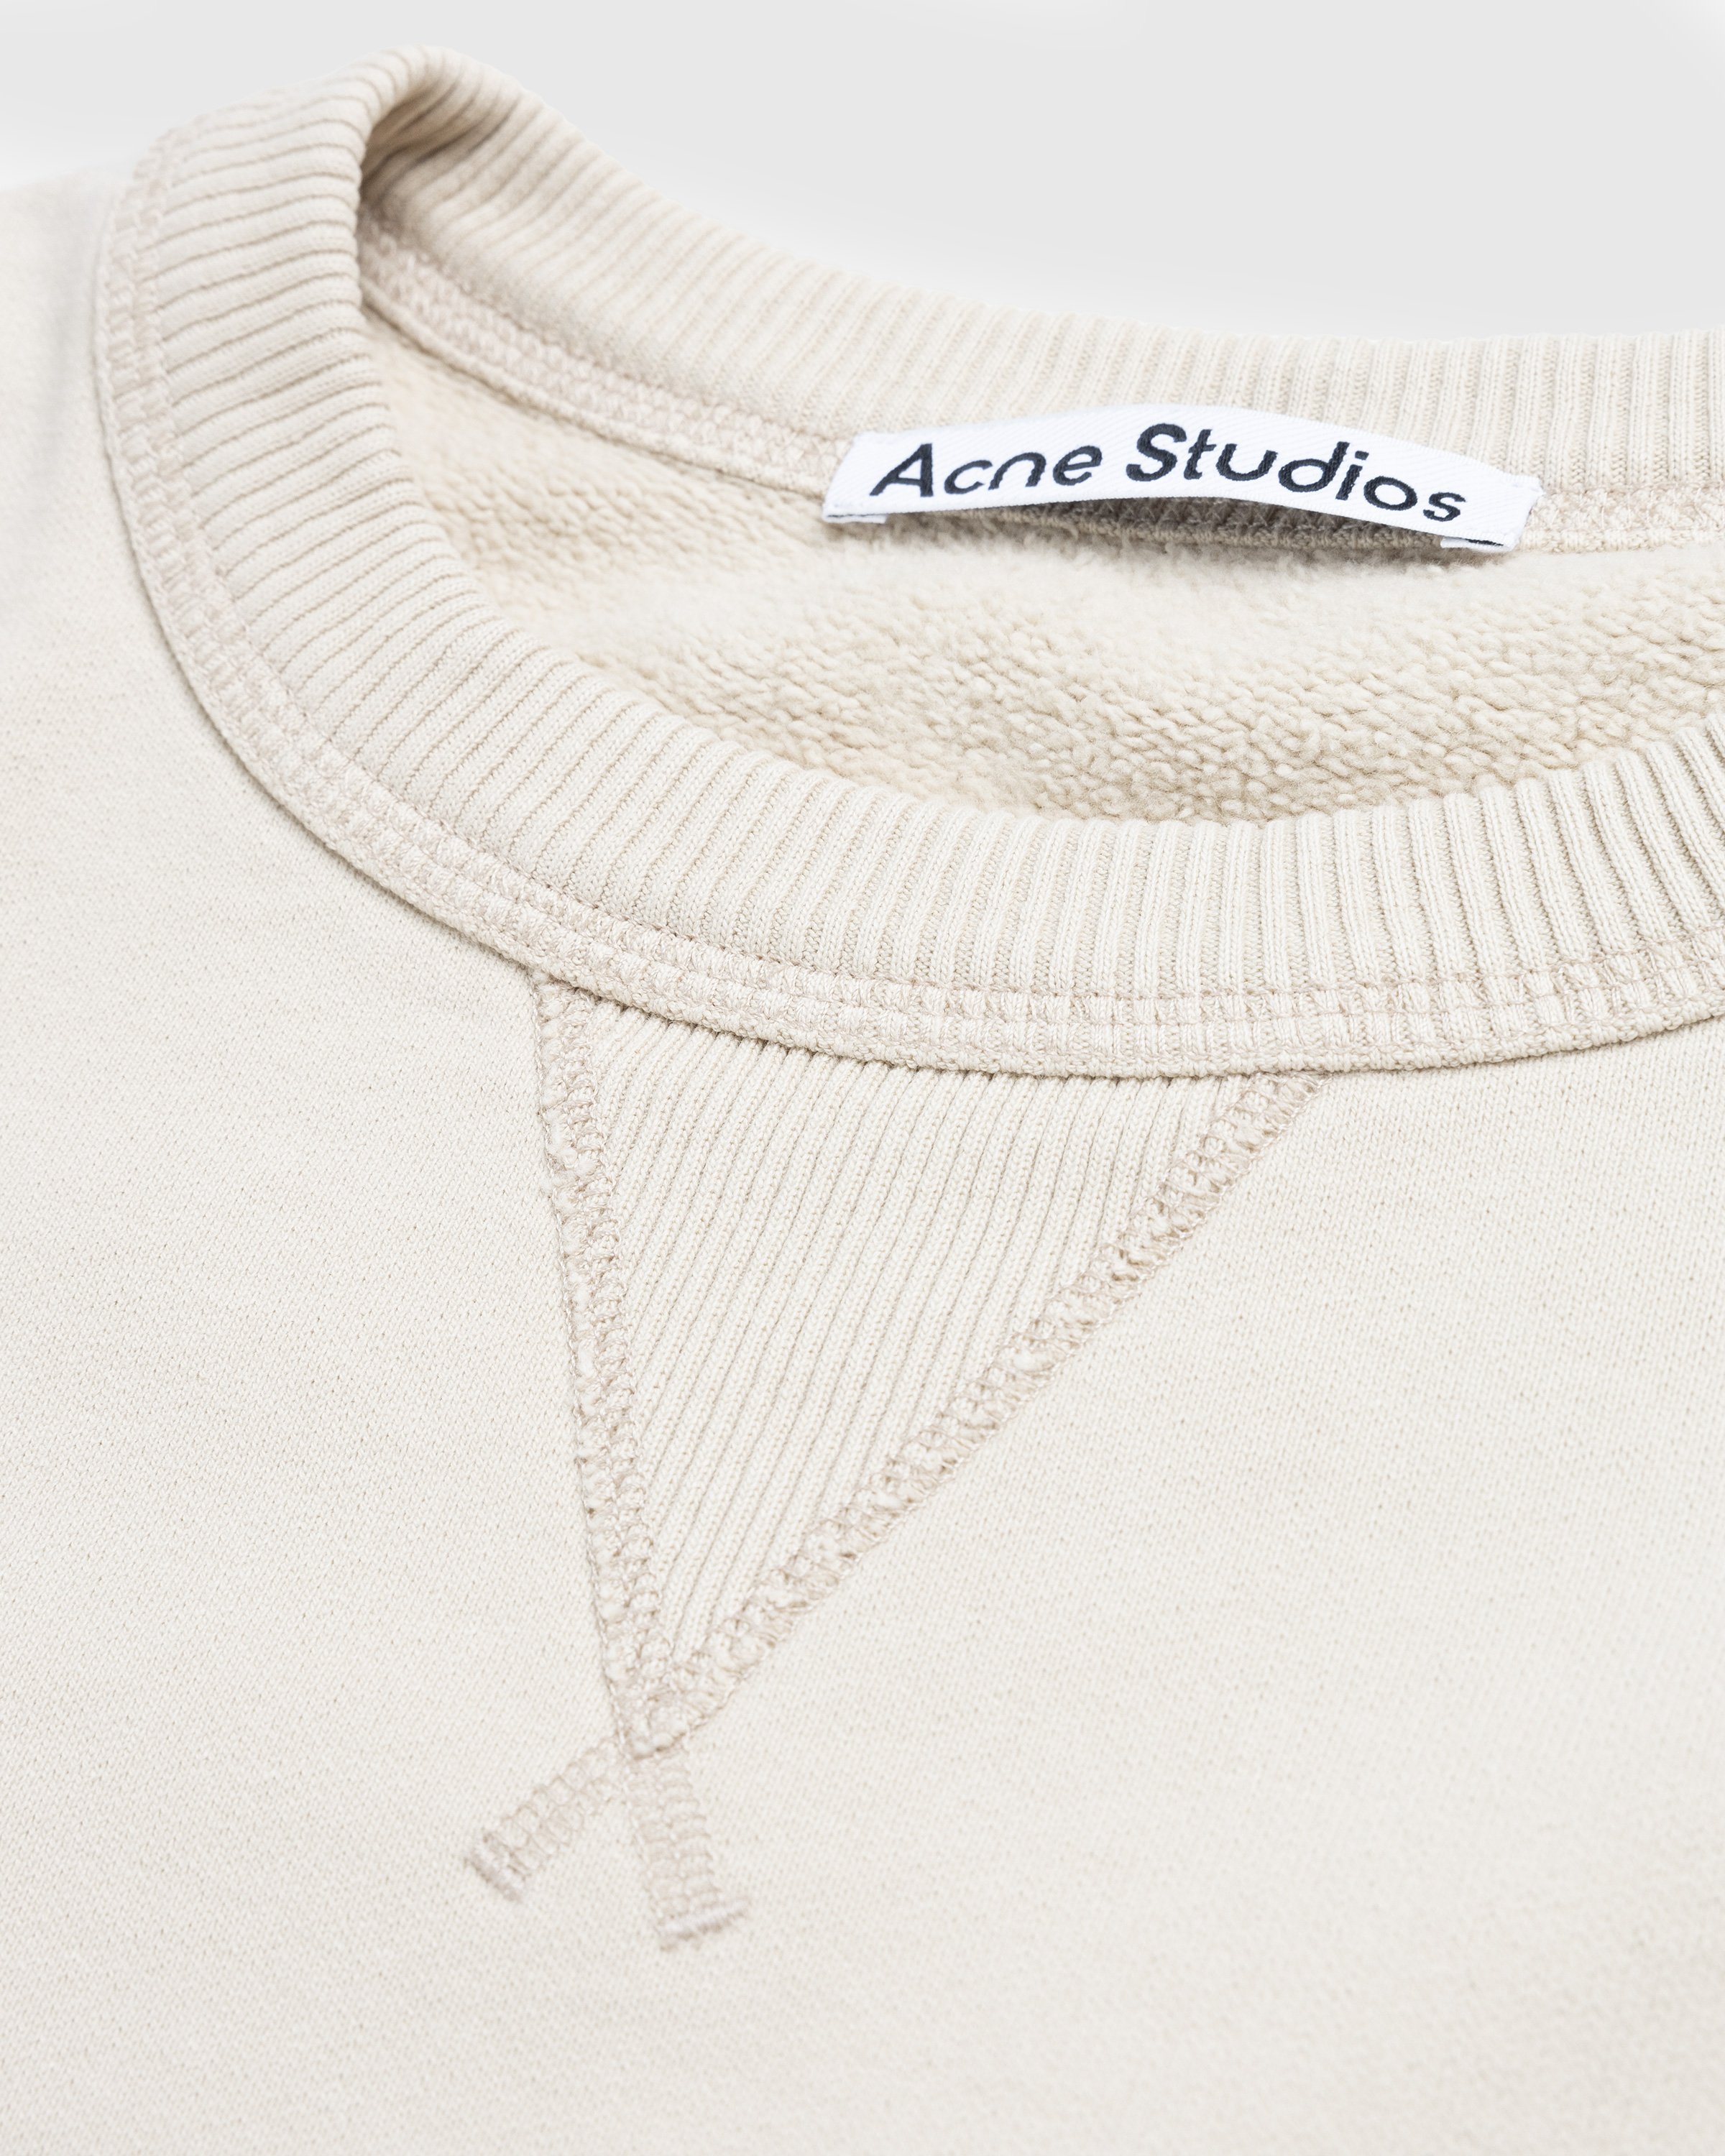 Acne Studios - Stamp Logo Sweater Champagne Beige - Clothing - Beige - Image 5